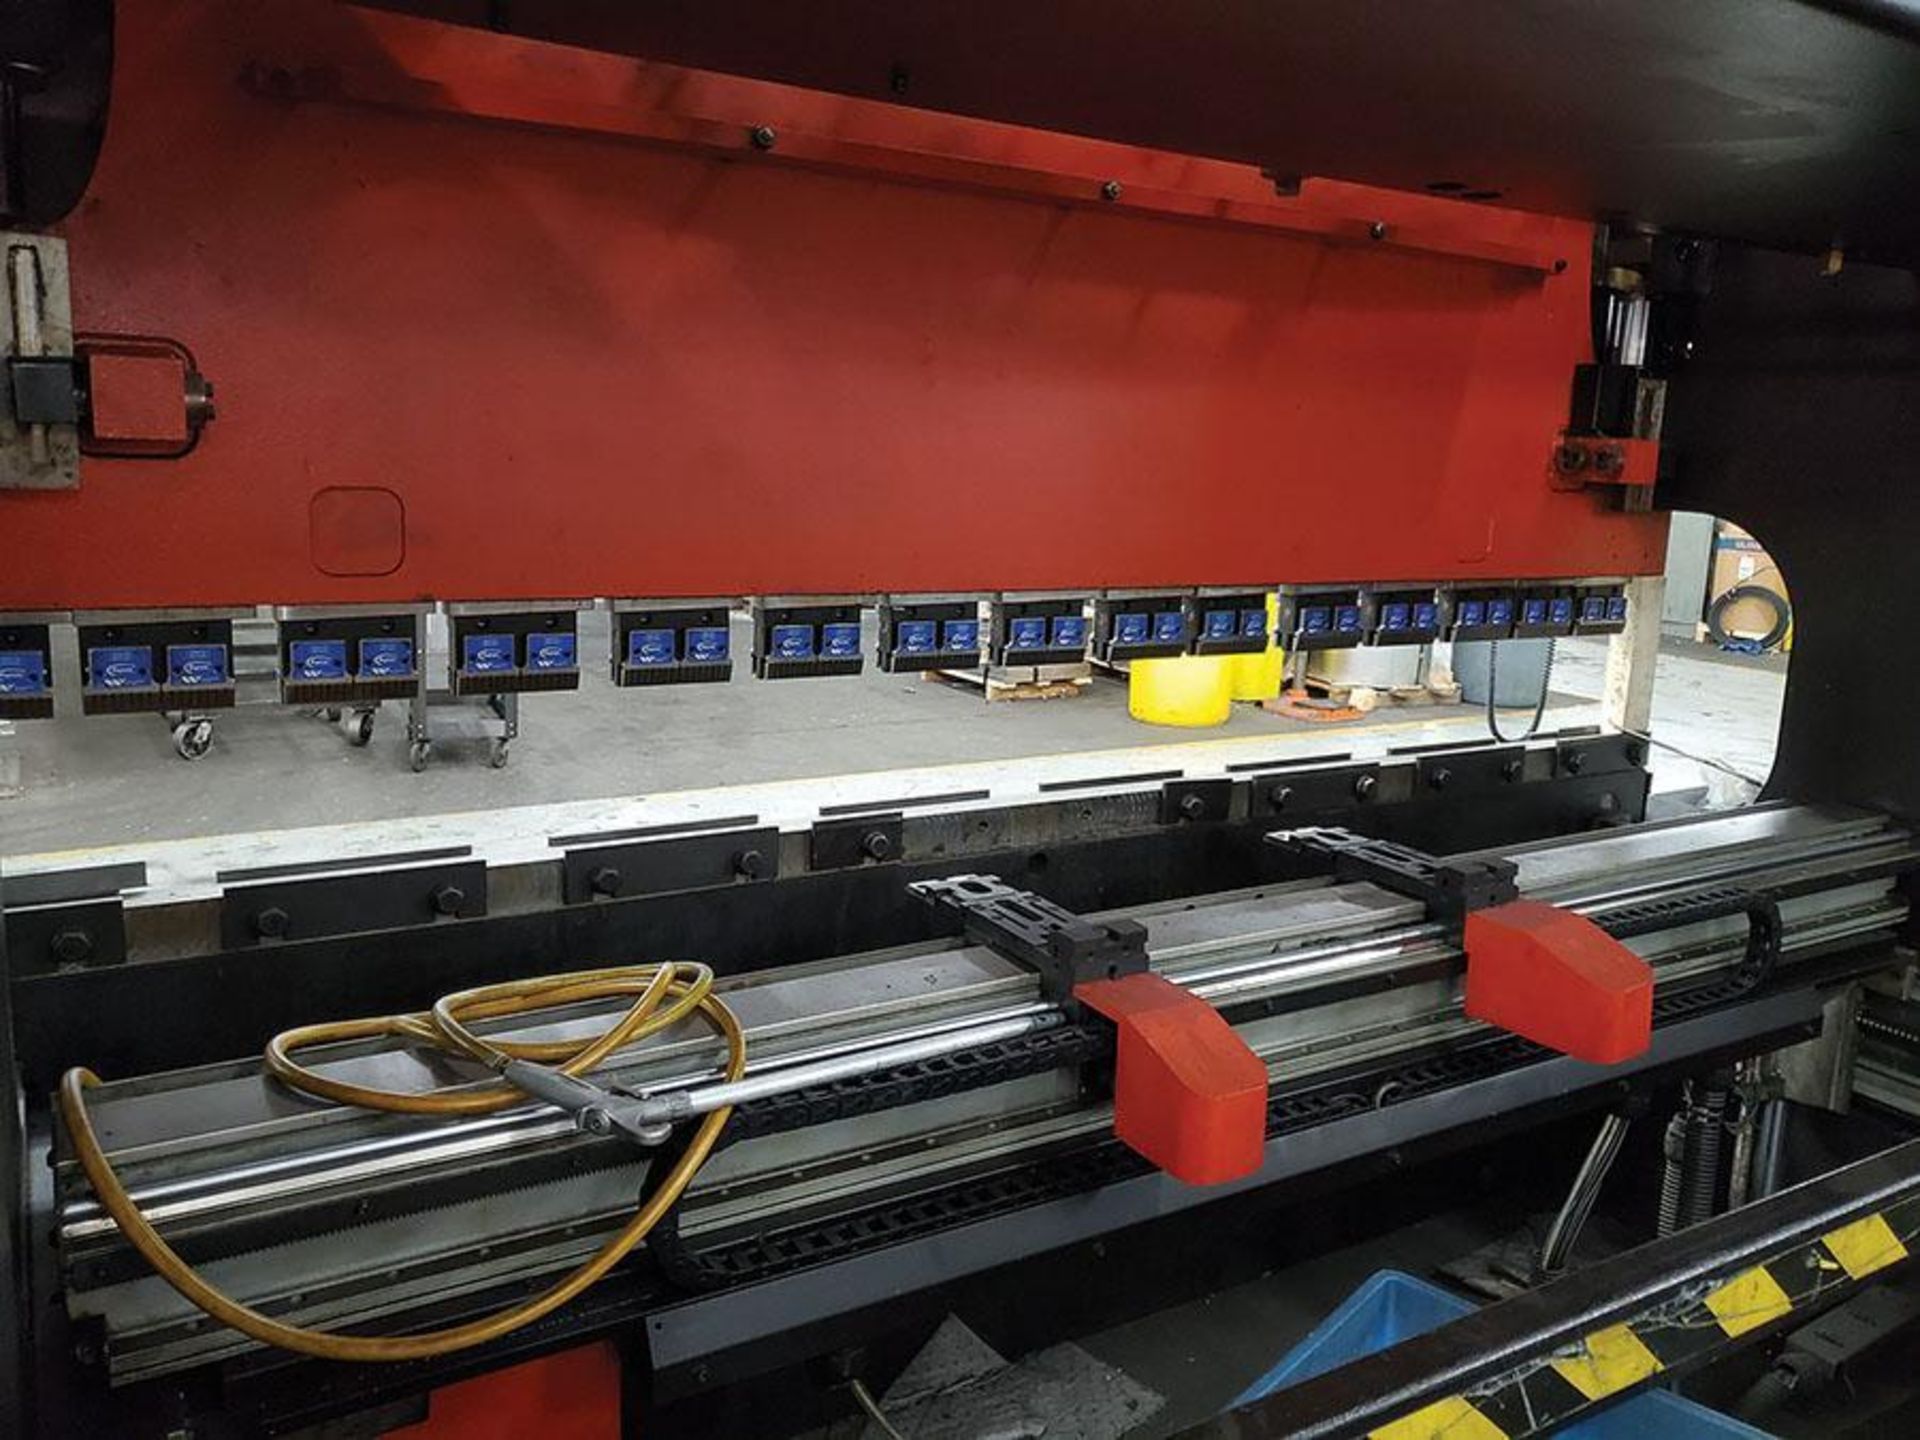 2001 AMADA HFE 100-3S CNC PRESS BRAKE, S/N HFE 100-3S V010635, 1000KN, 200MM, 460V, 10' BED, DUAL FO - Image 6 of 10